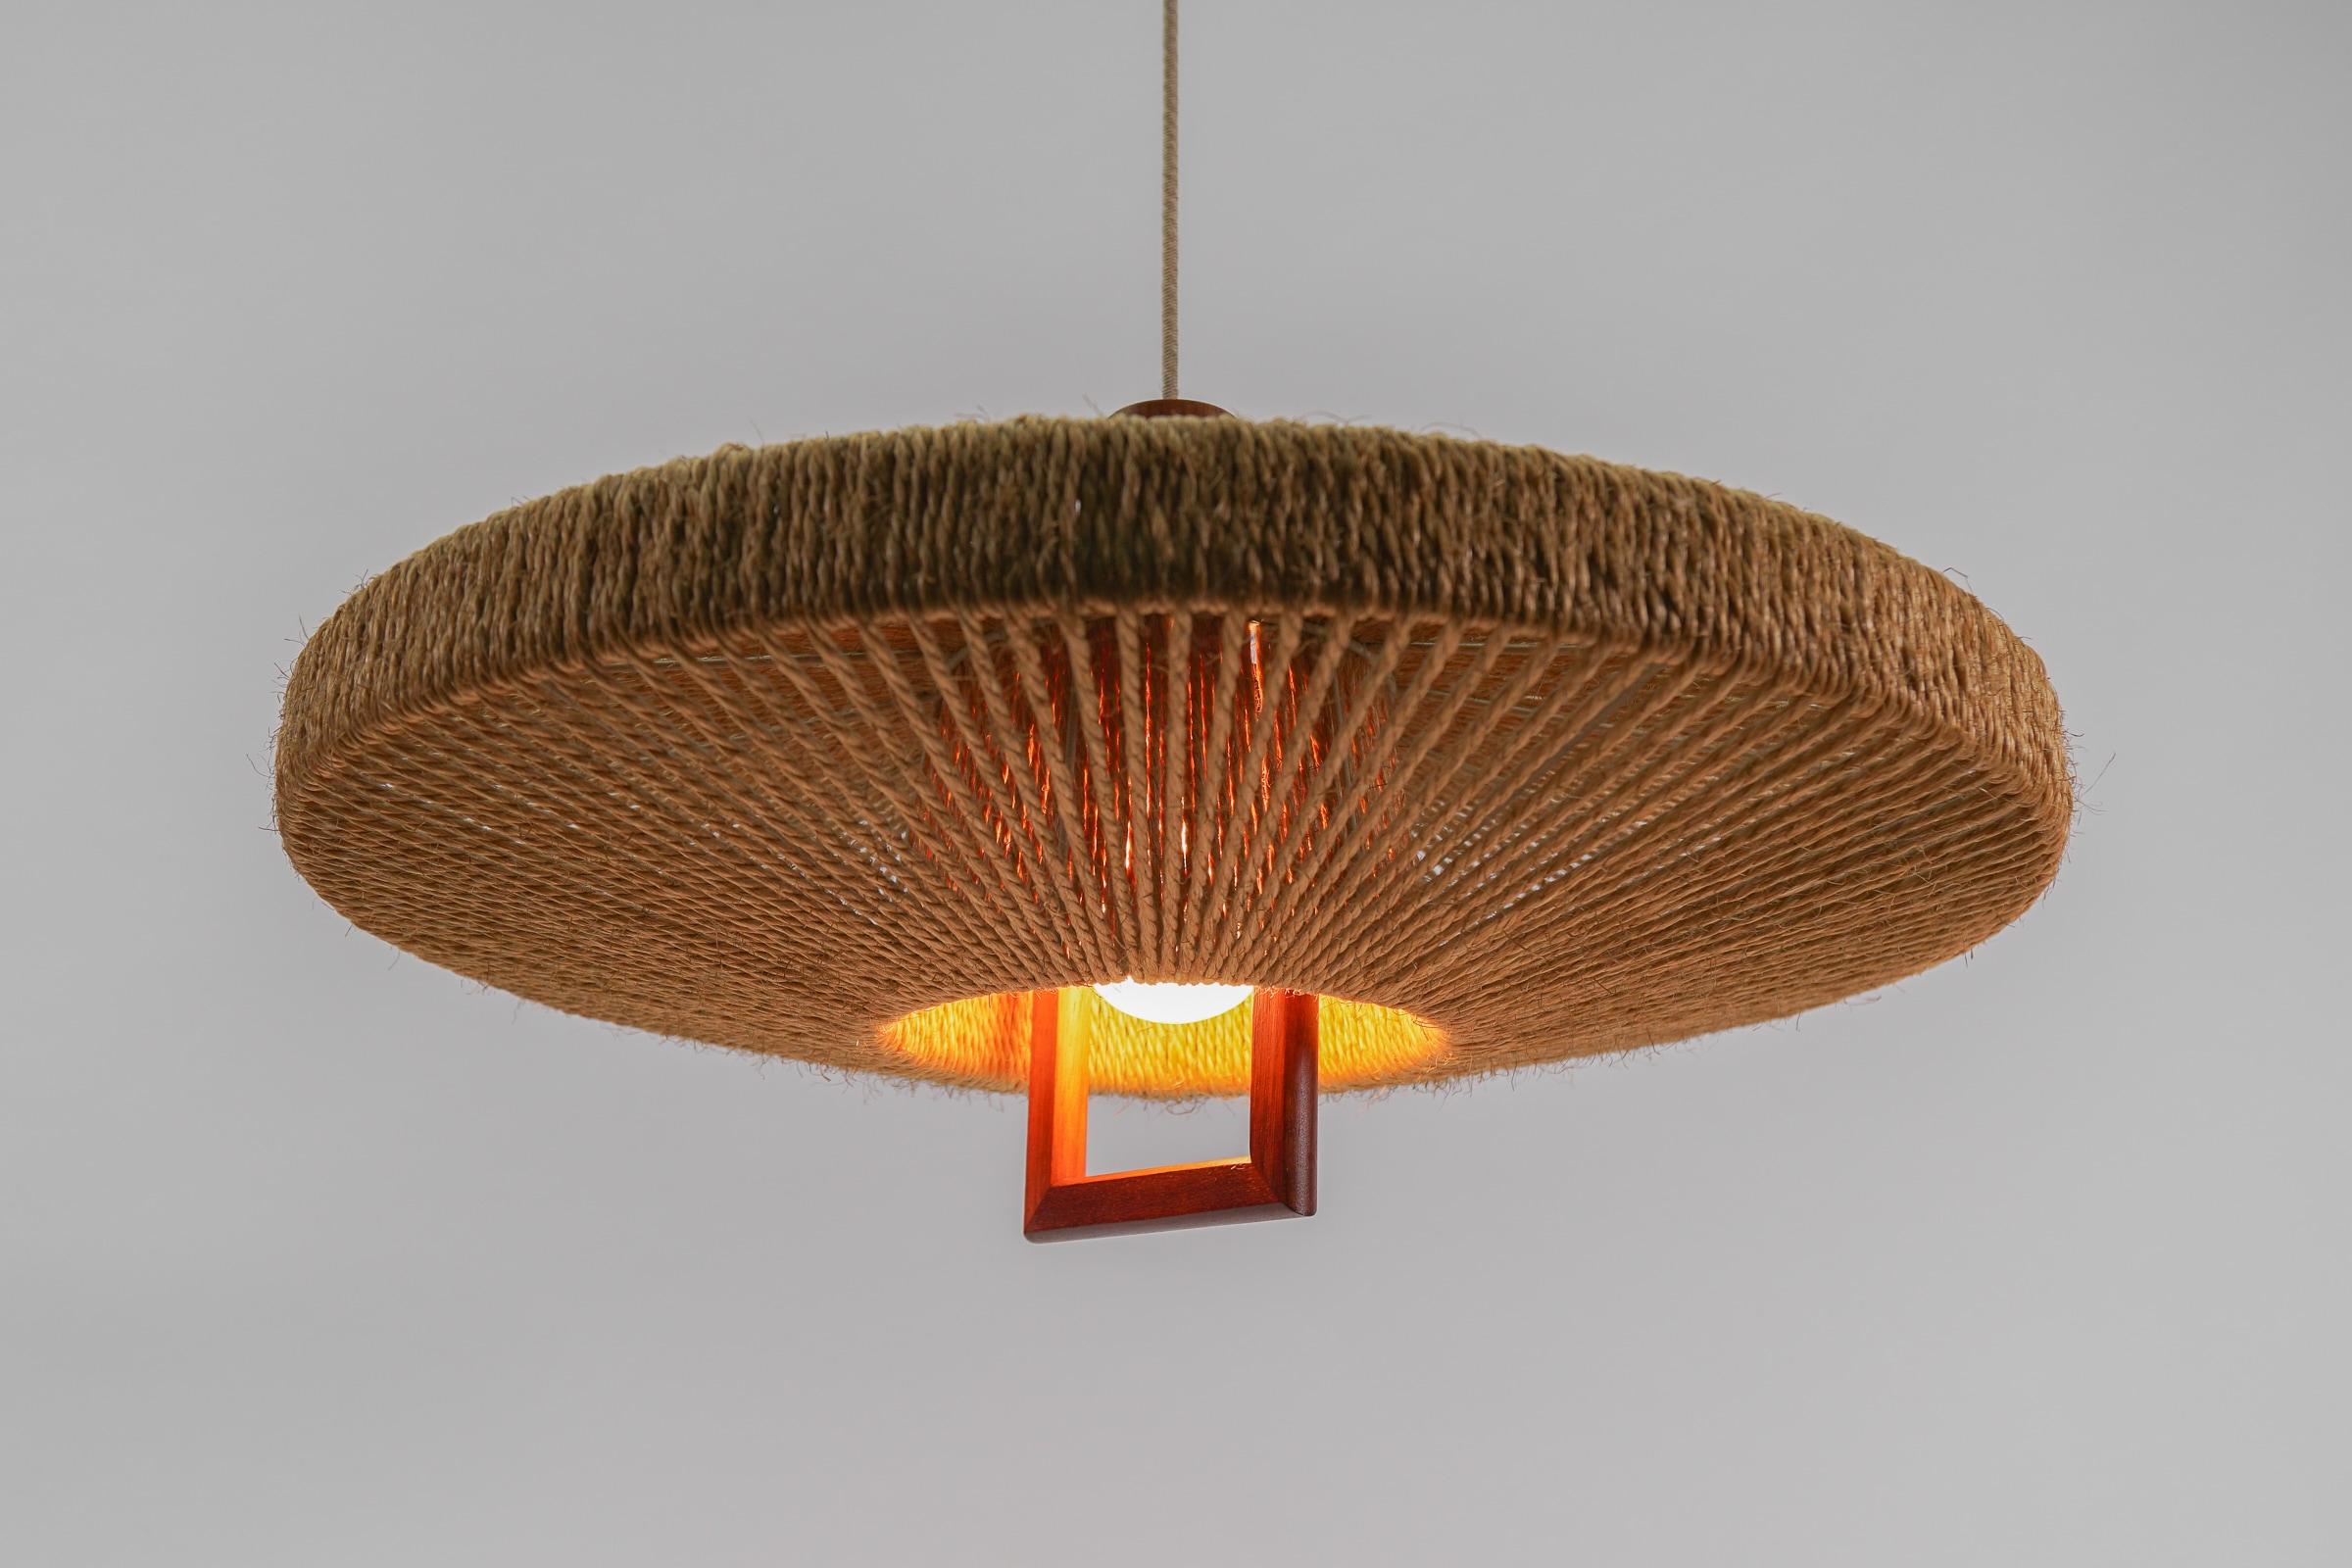 Metal Lovely Adjustable Ceiling Lamp Made in Teak and Jute by Temde Swiss, 1960s For Sale